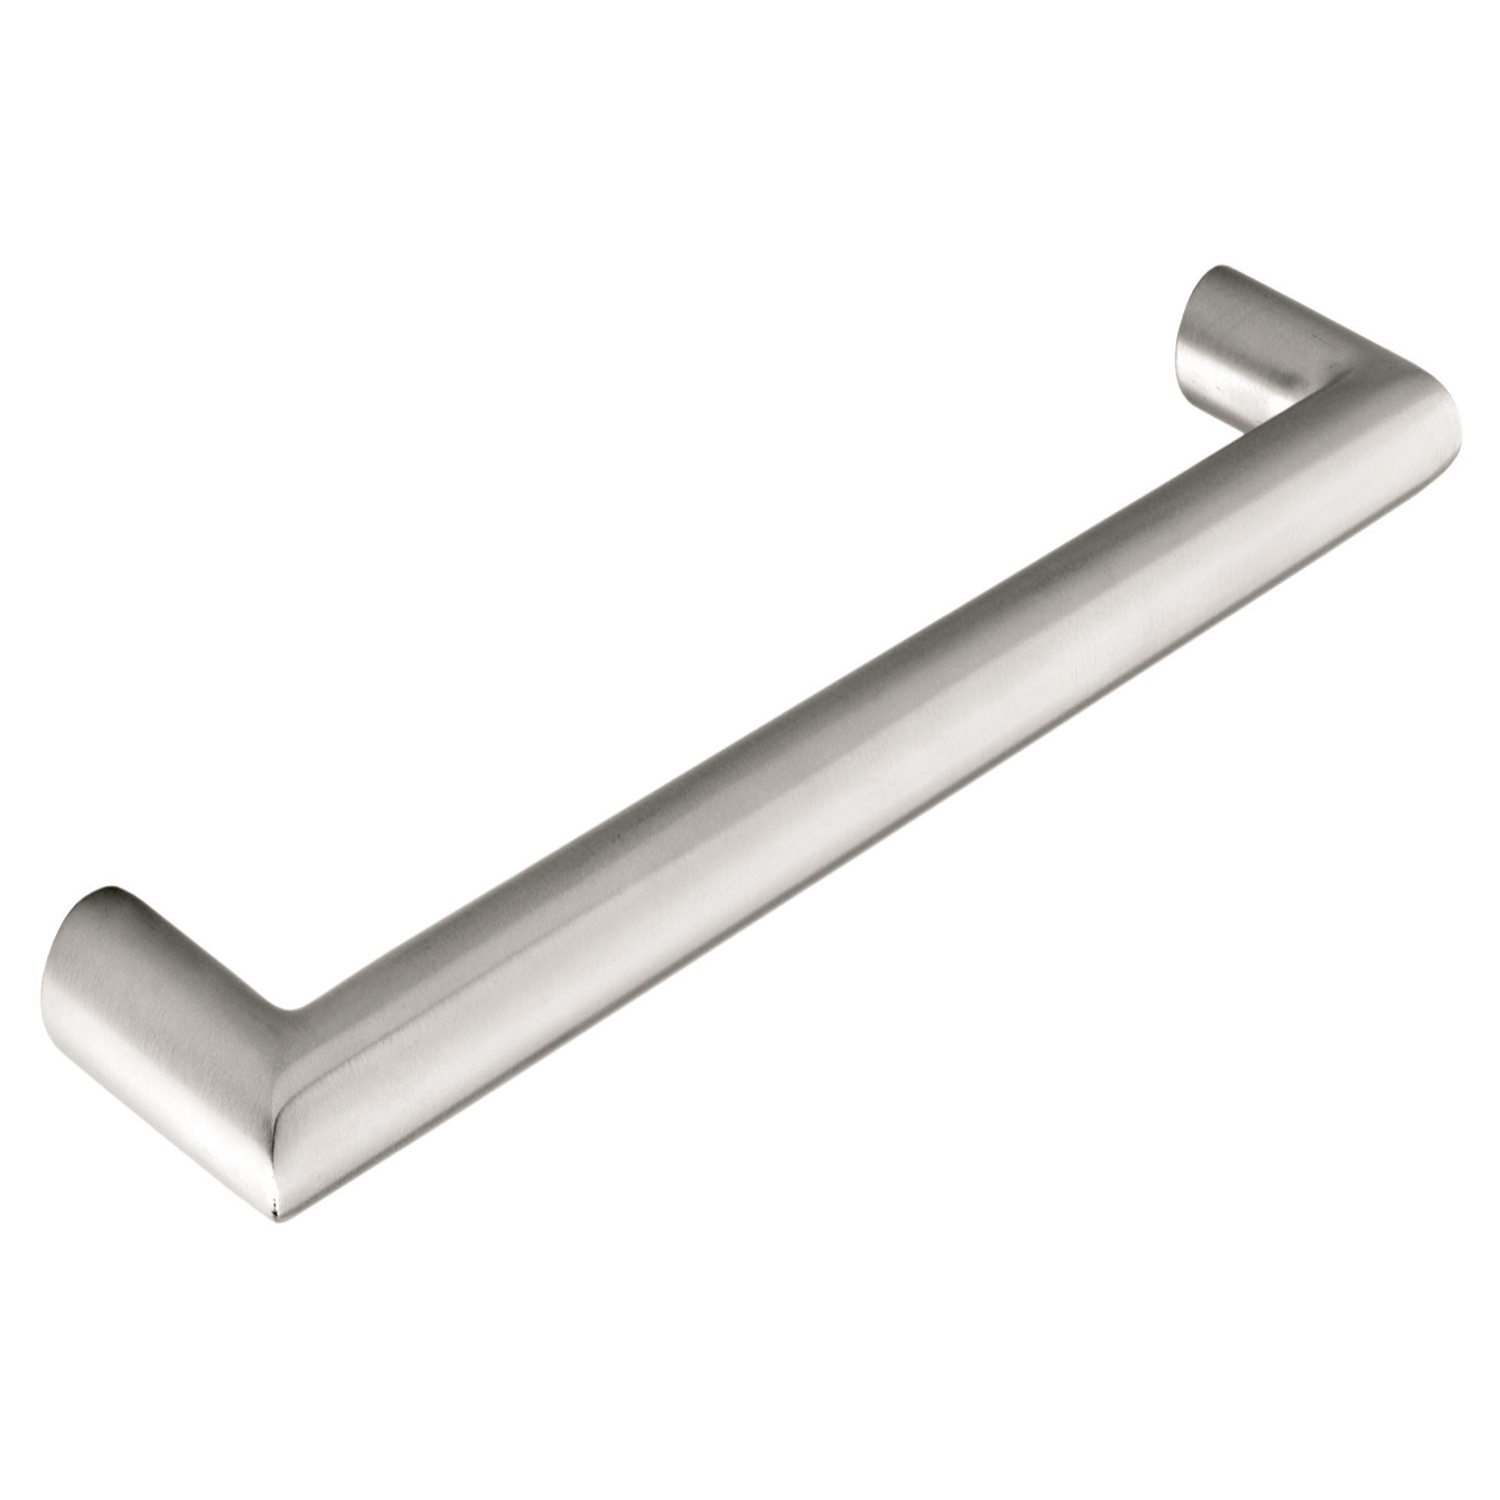 Authorised Supplier of PWS Handles | Hif Kitchens